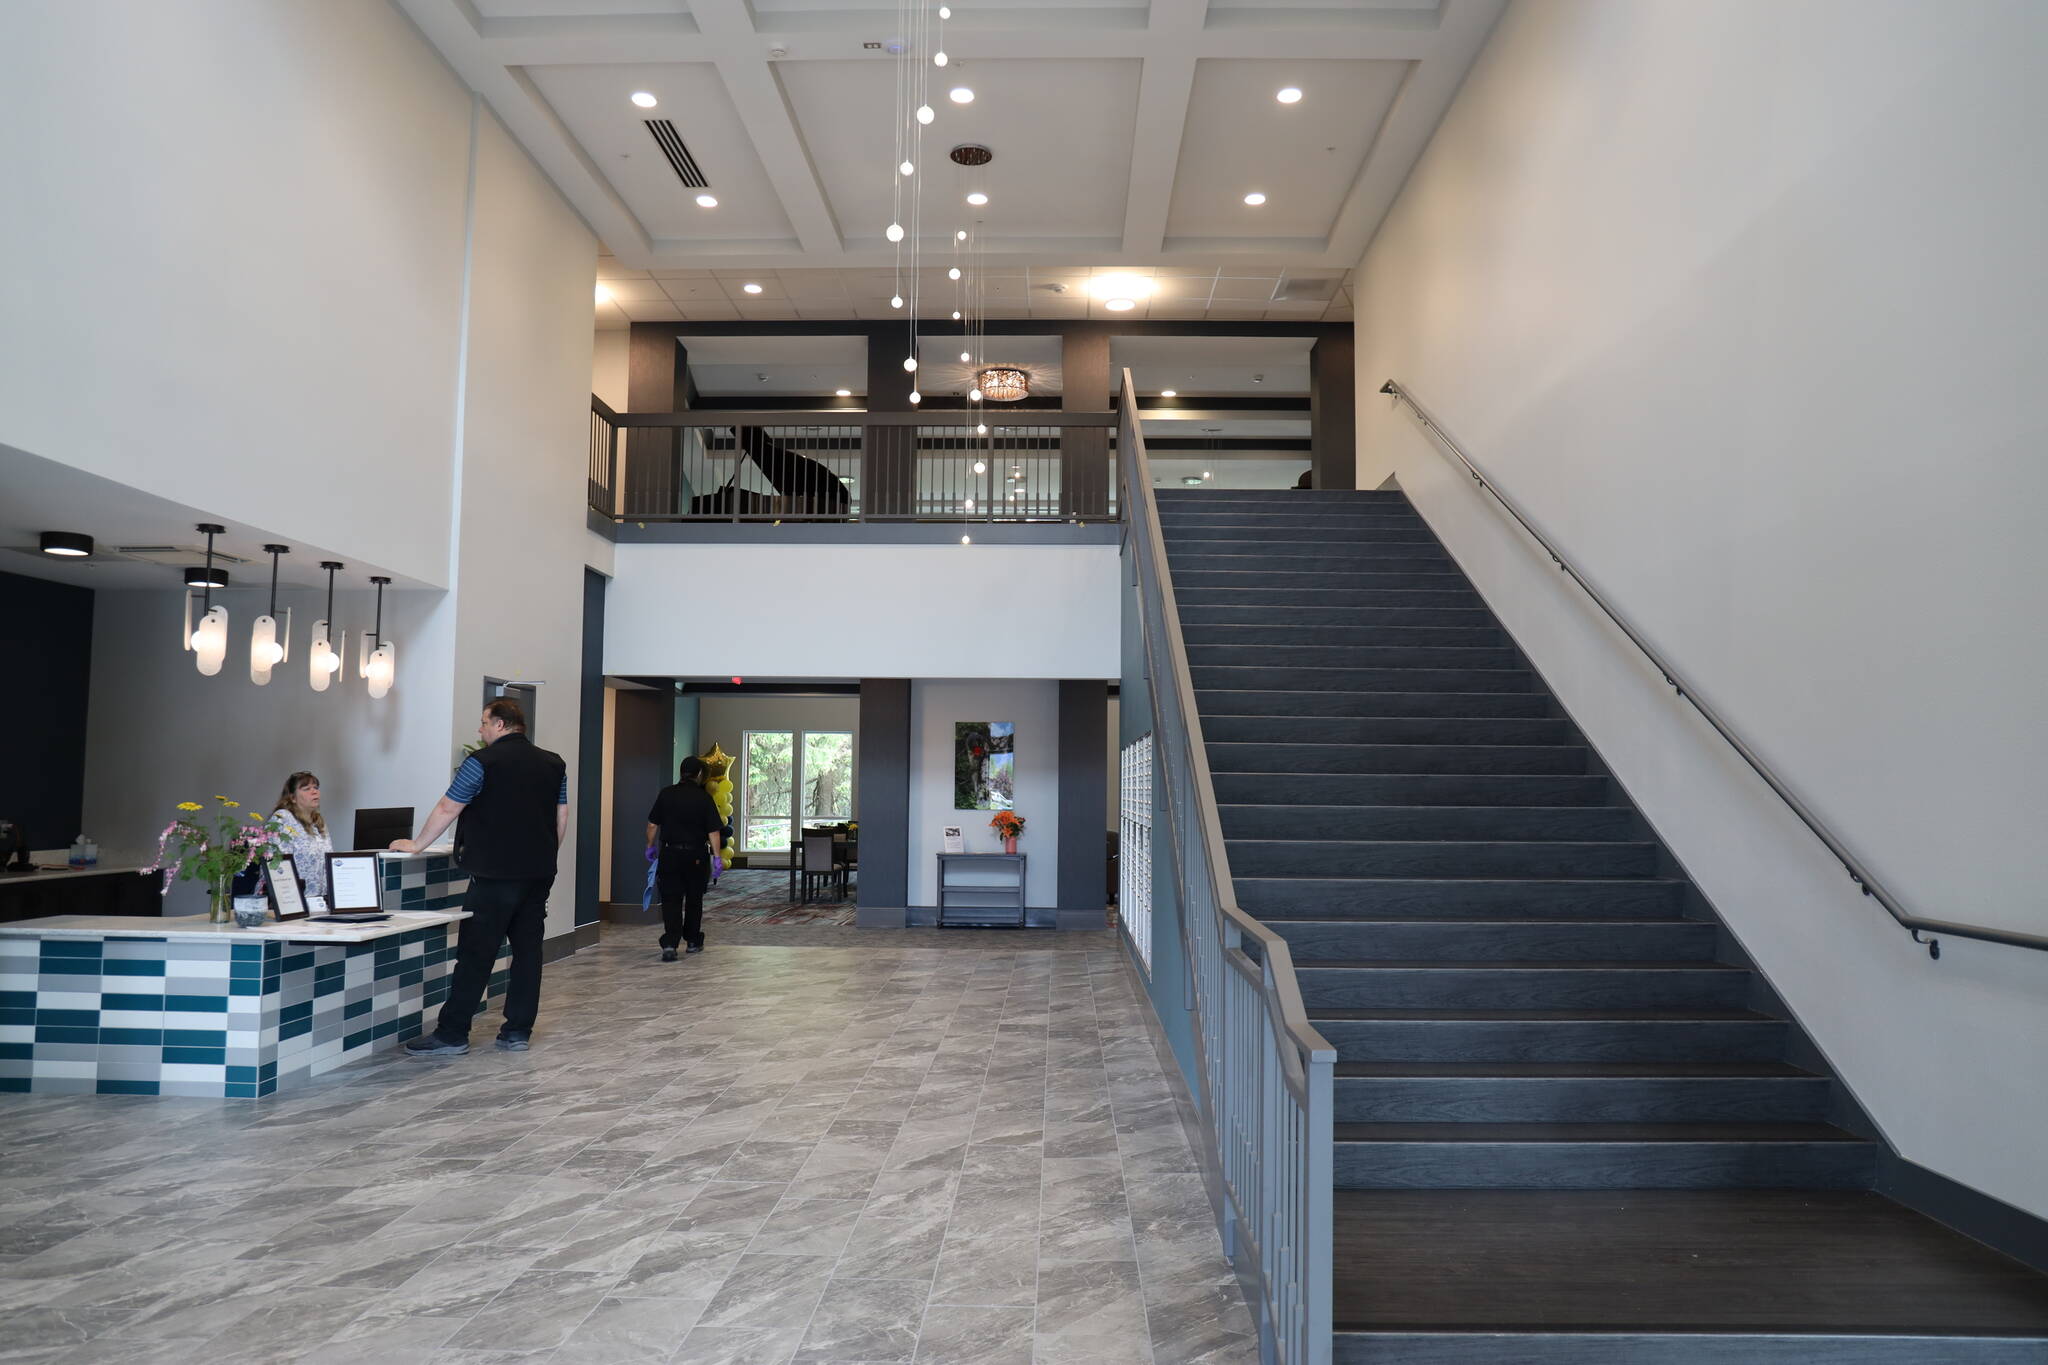 The entrance lobby of the Riverview Senior Living complex leads to a variety of in-house facilities including dining and recreation areas. (Clarise Larson / Juneau Empire)